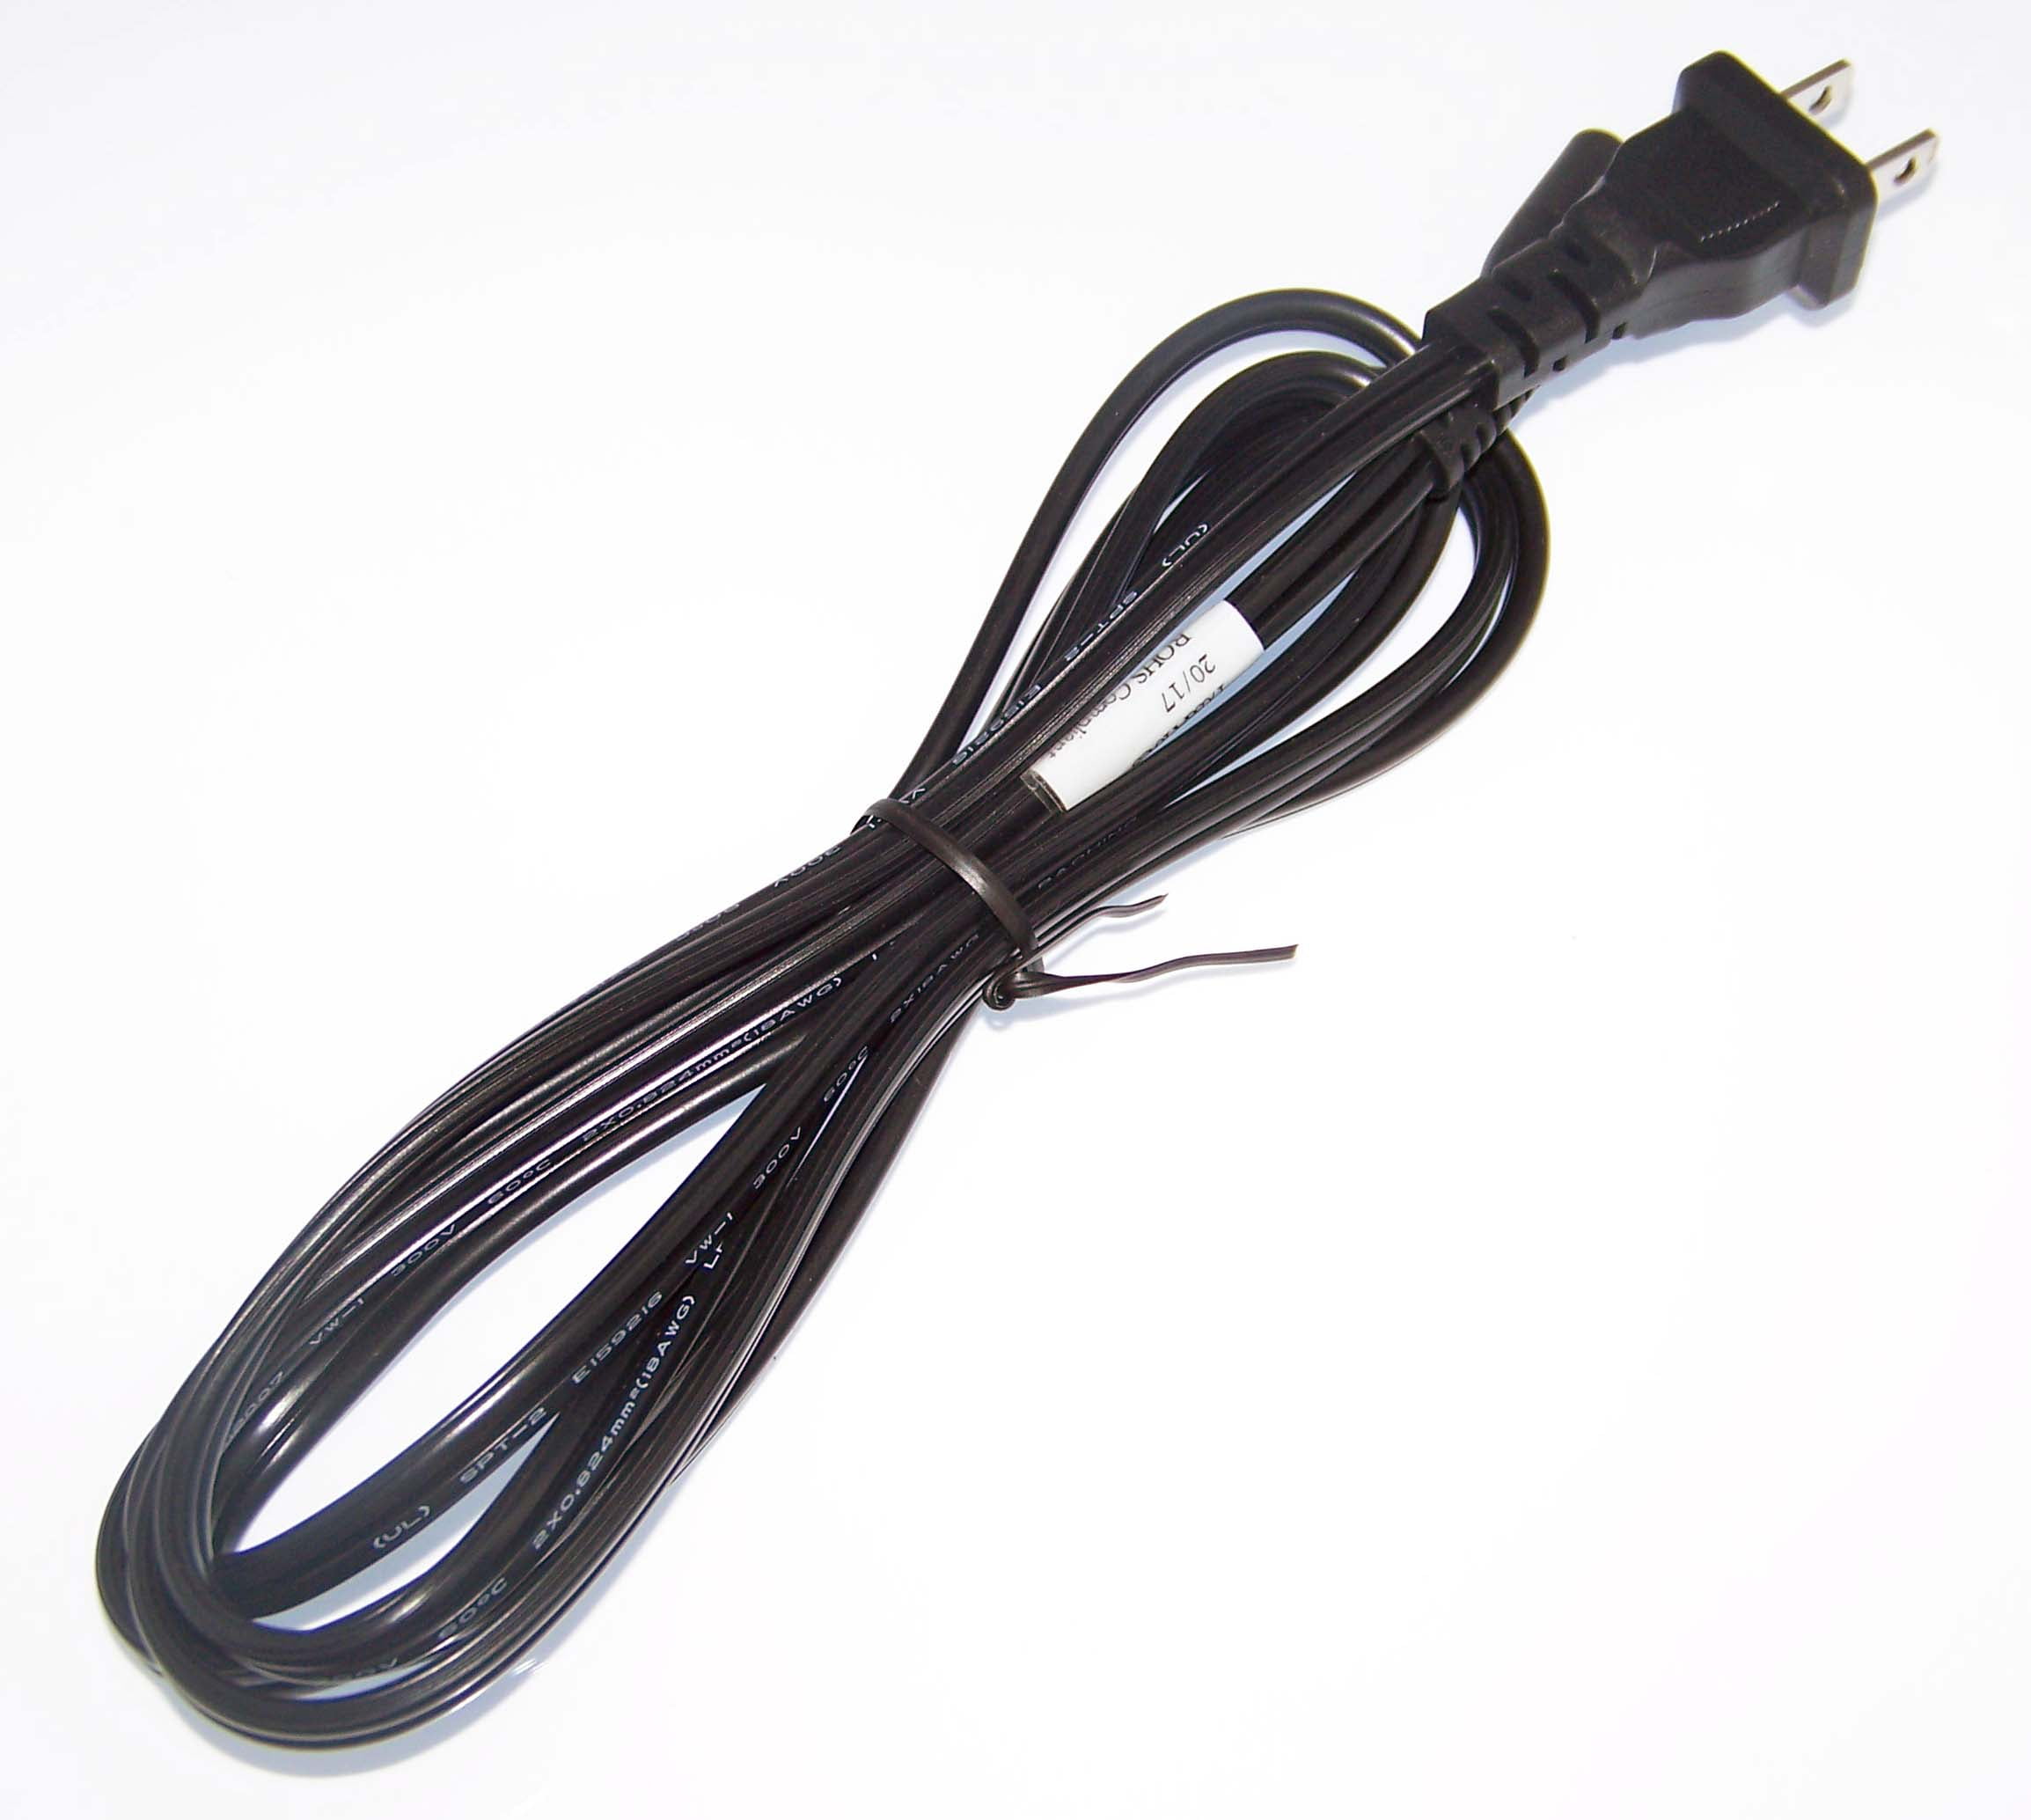 ReadyWired Power Cord Cable for Epson Workforce ET-16500 WF-R4640 Printer